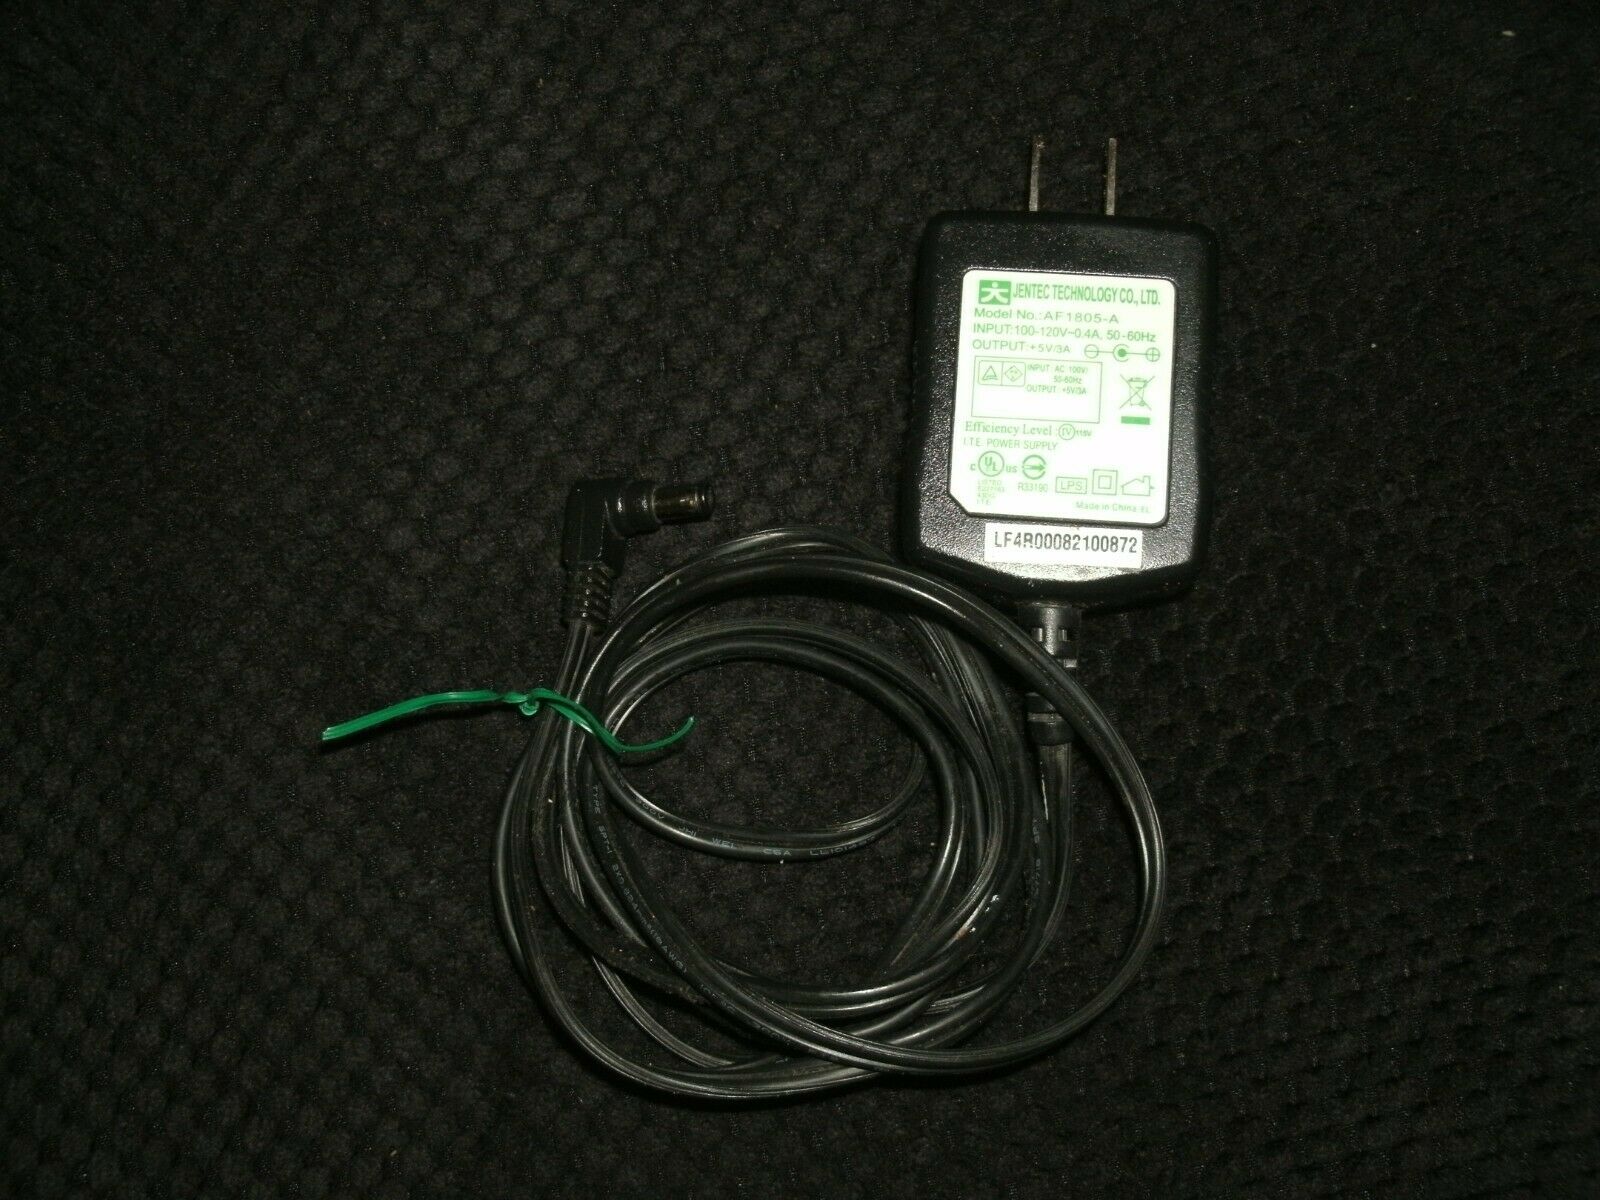 Jentec Technology AC Adapter Power Supply 5V 3A Model Number AF1805-A Type: Power Cord Features: Flat Cable Cable L